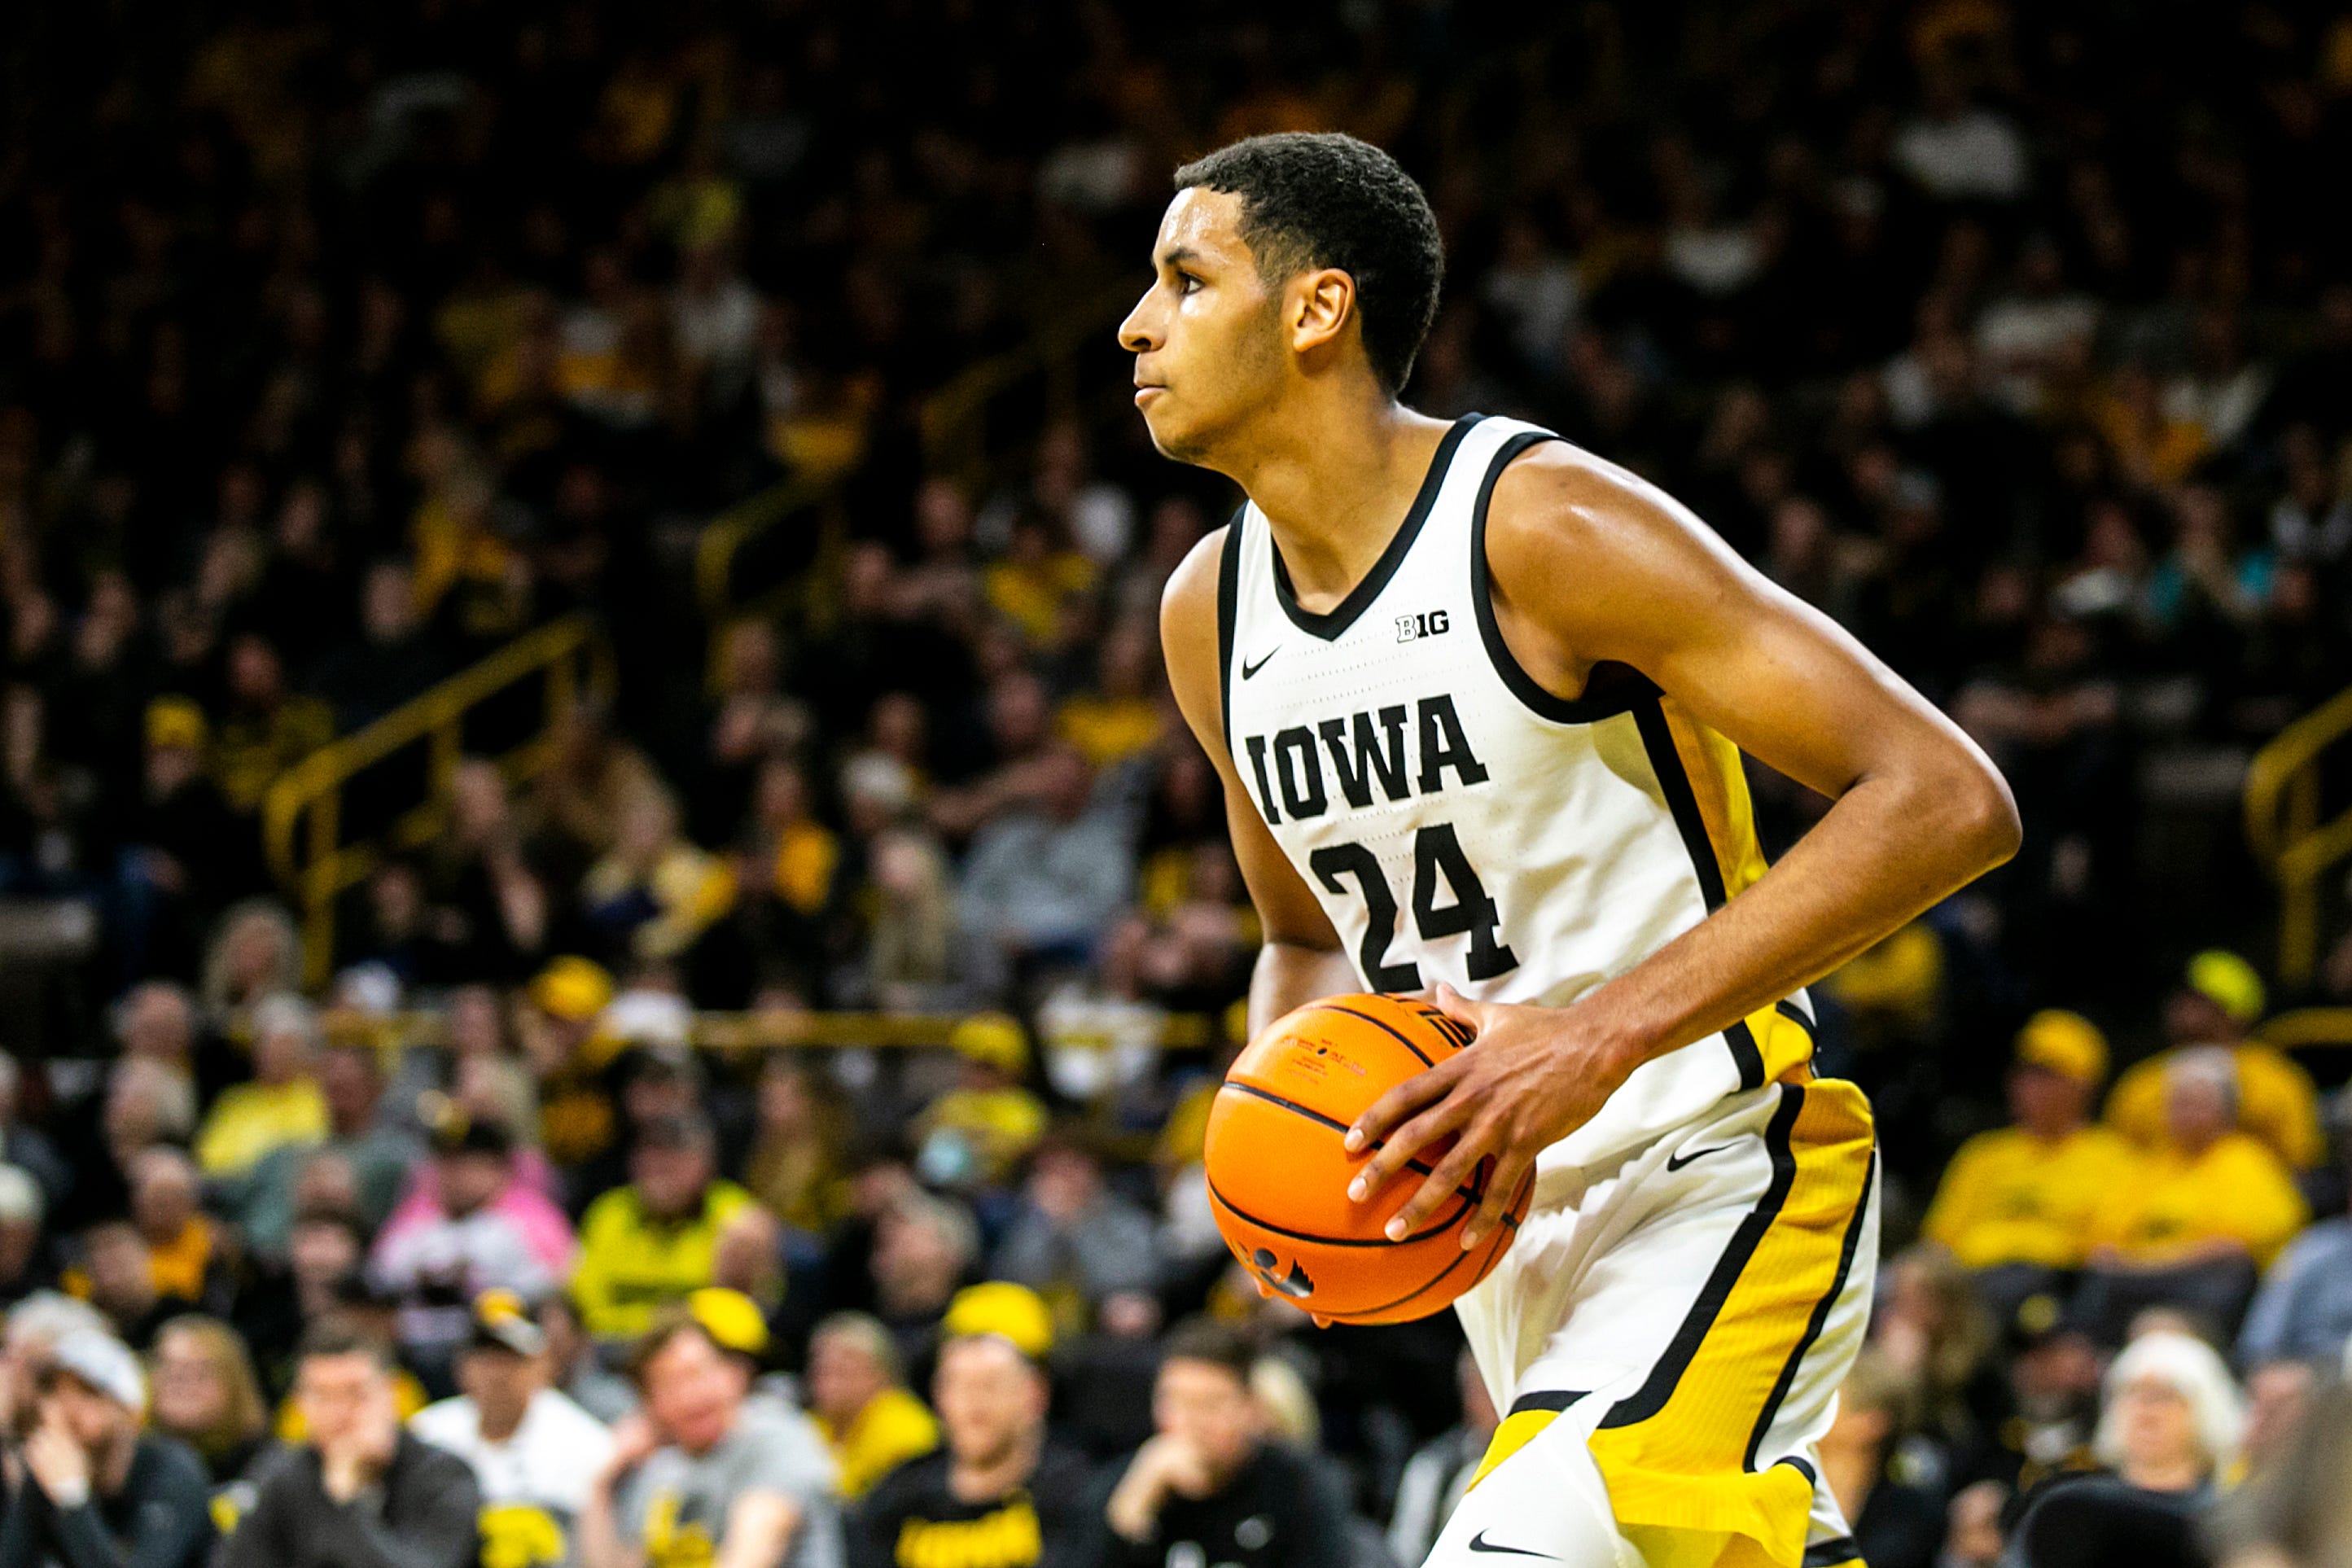 Iowa forward Kris Murray (24) inbounds the ball during a NCAA Big Ten Conference men’s basketball game against Nebraska, Sunday, March 5, 2023, at Carver-Hawkeye Arena in Iowa City, Iowa.